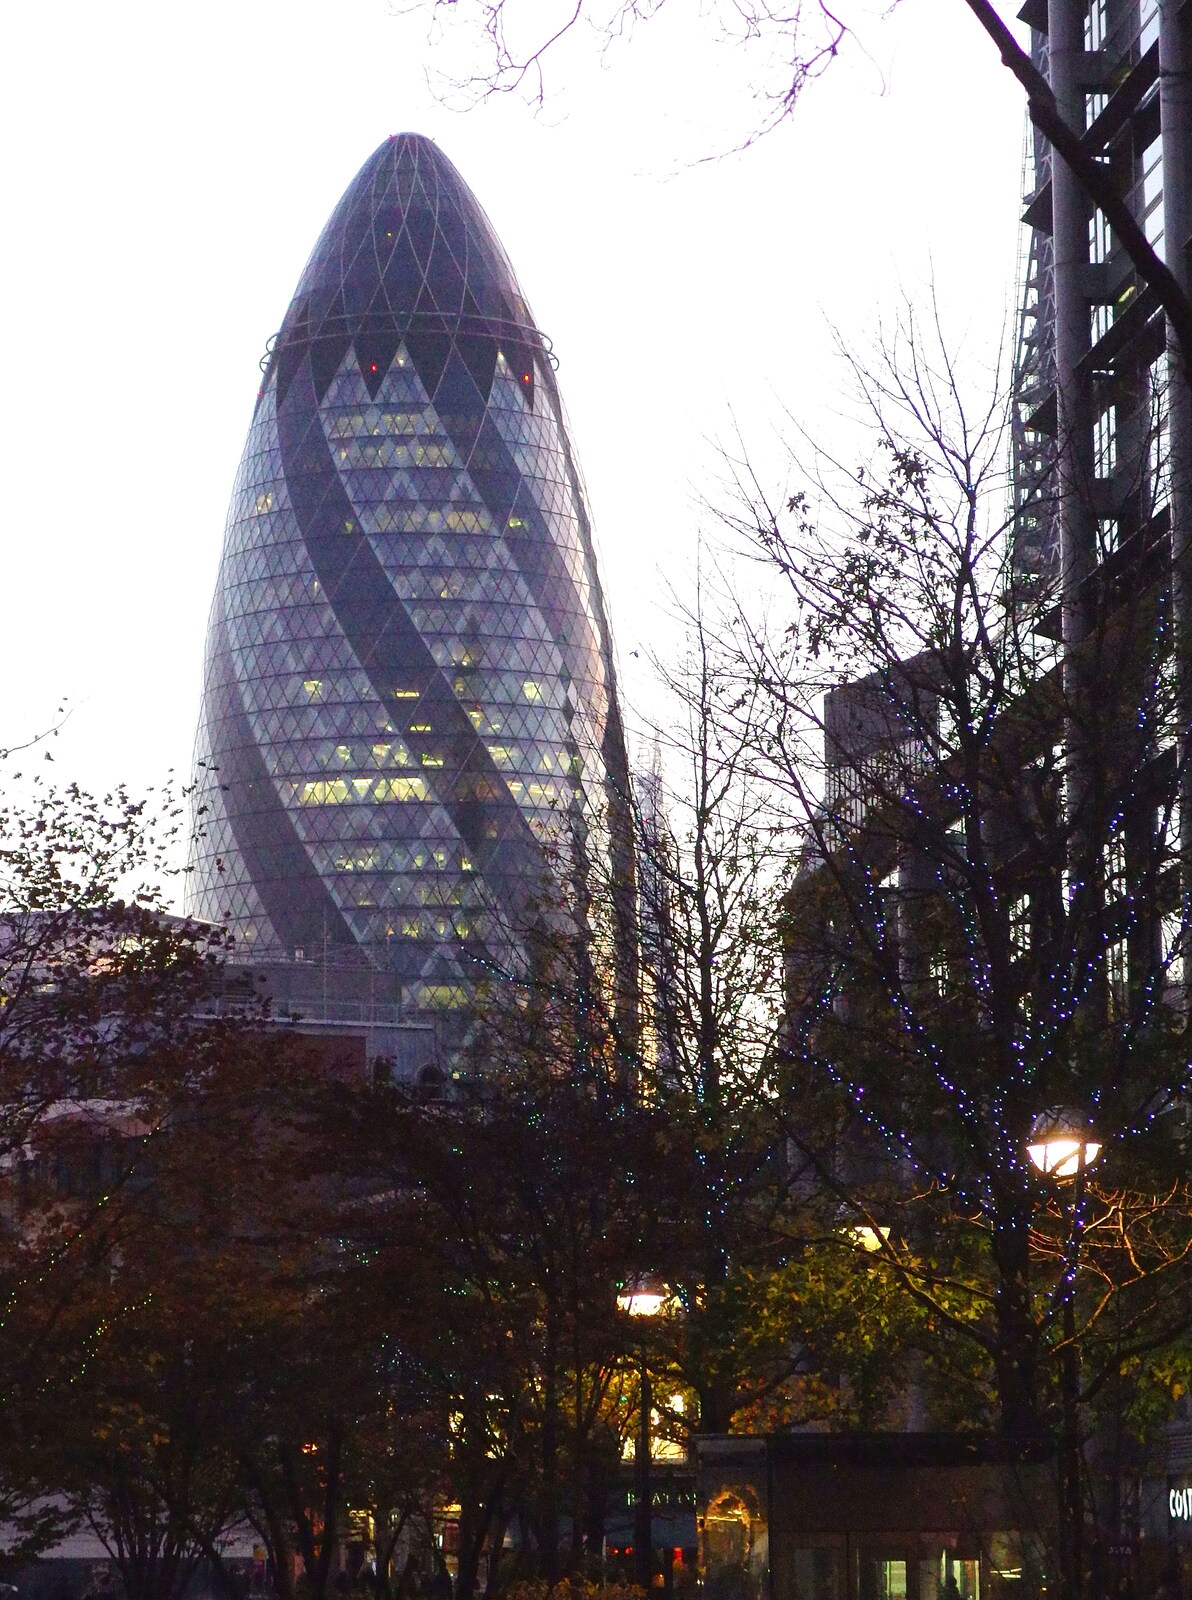 The Swiss Re 'Gherkin' from Lunch in the East End, Spitalfields and Brick Lane, London - 1st December 2013